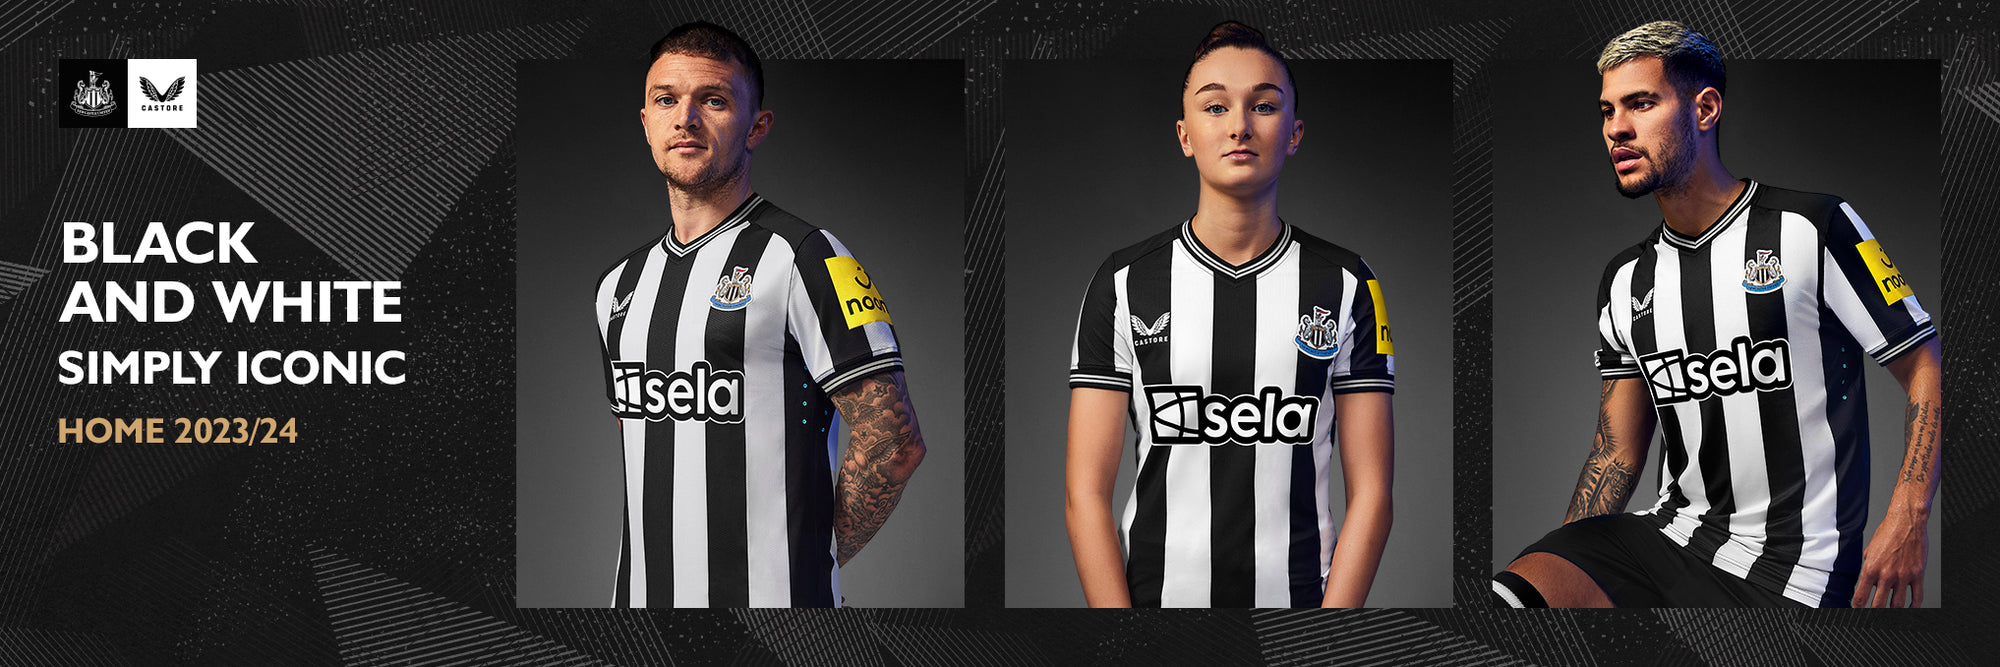 23 24 Home Kit Launch - NUFC Store